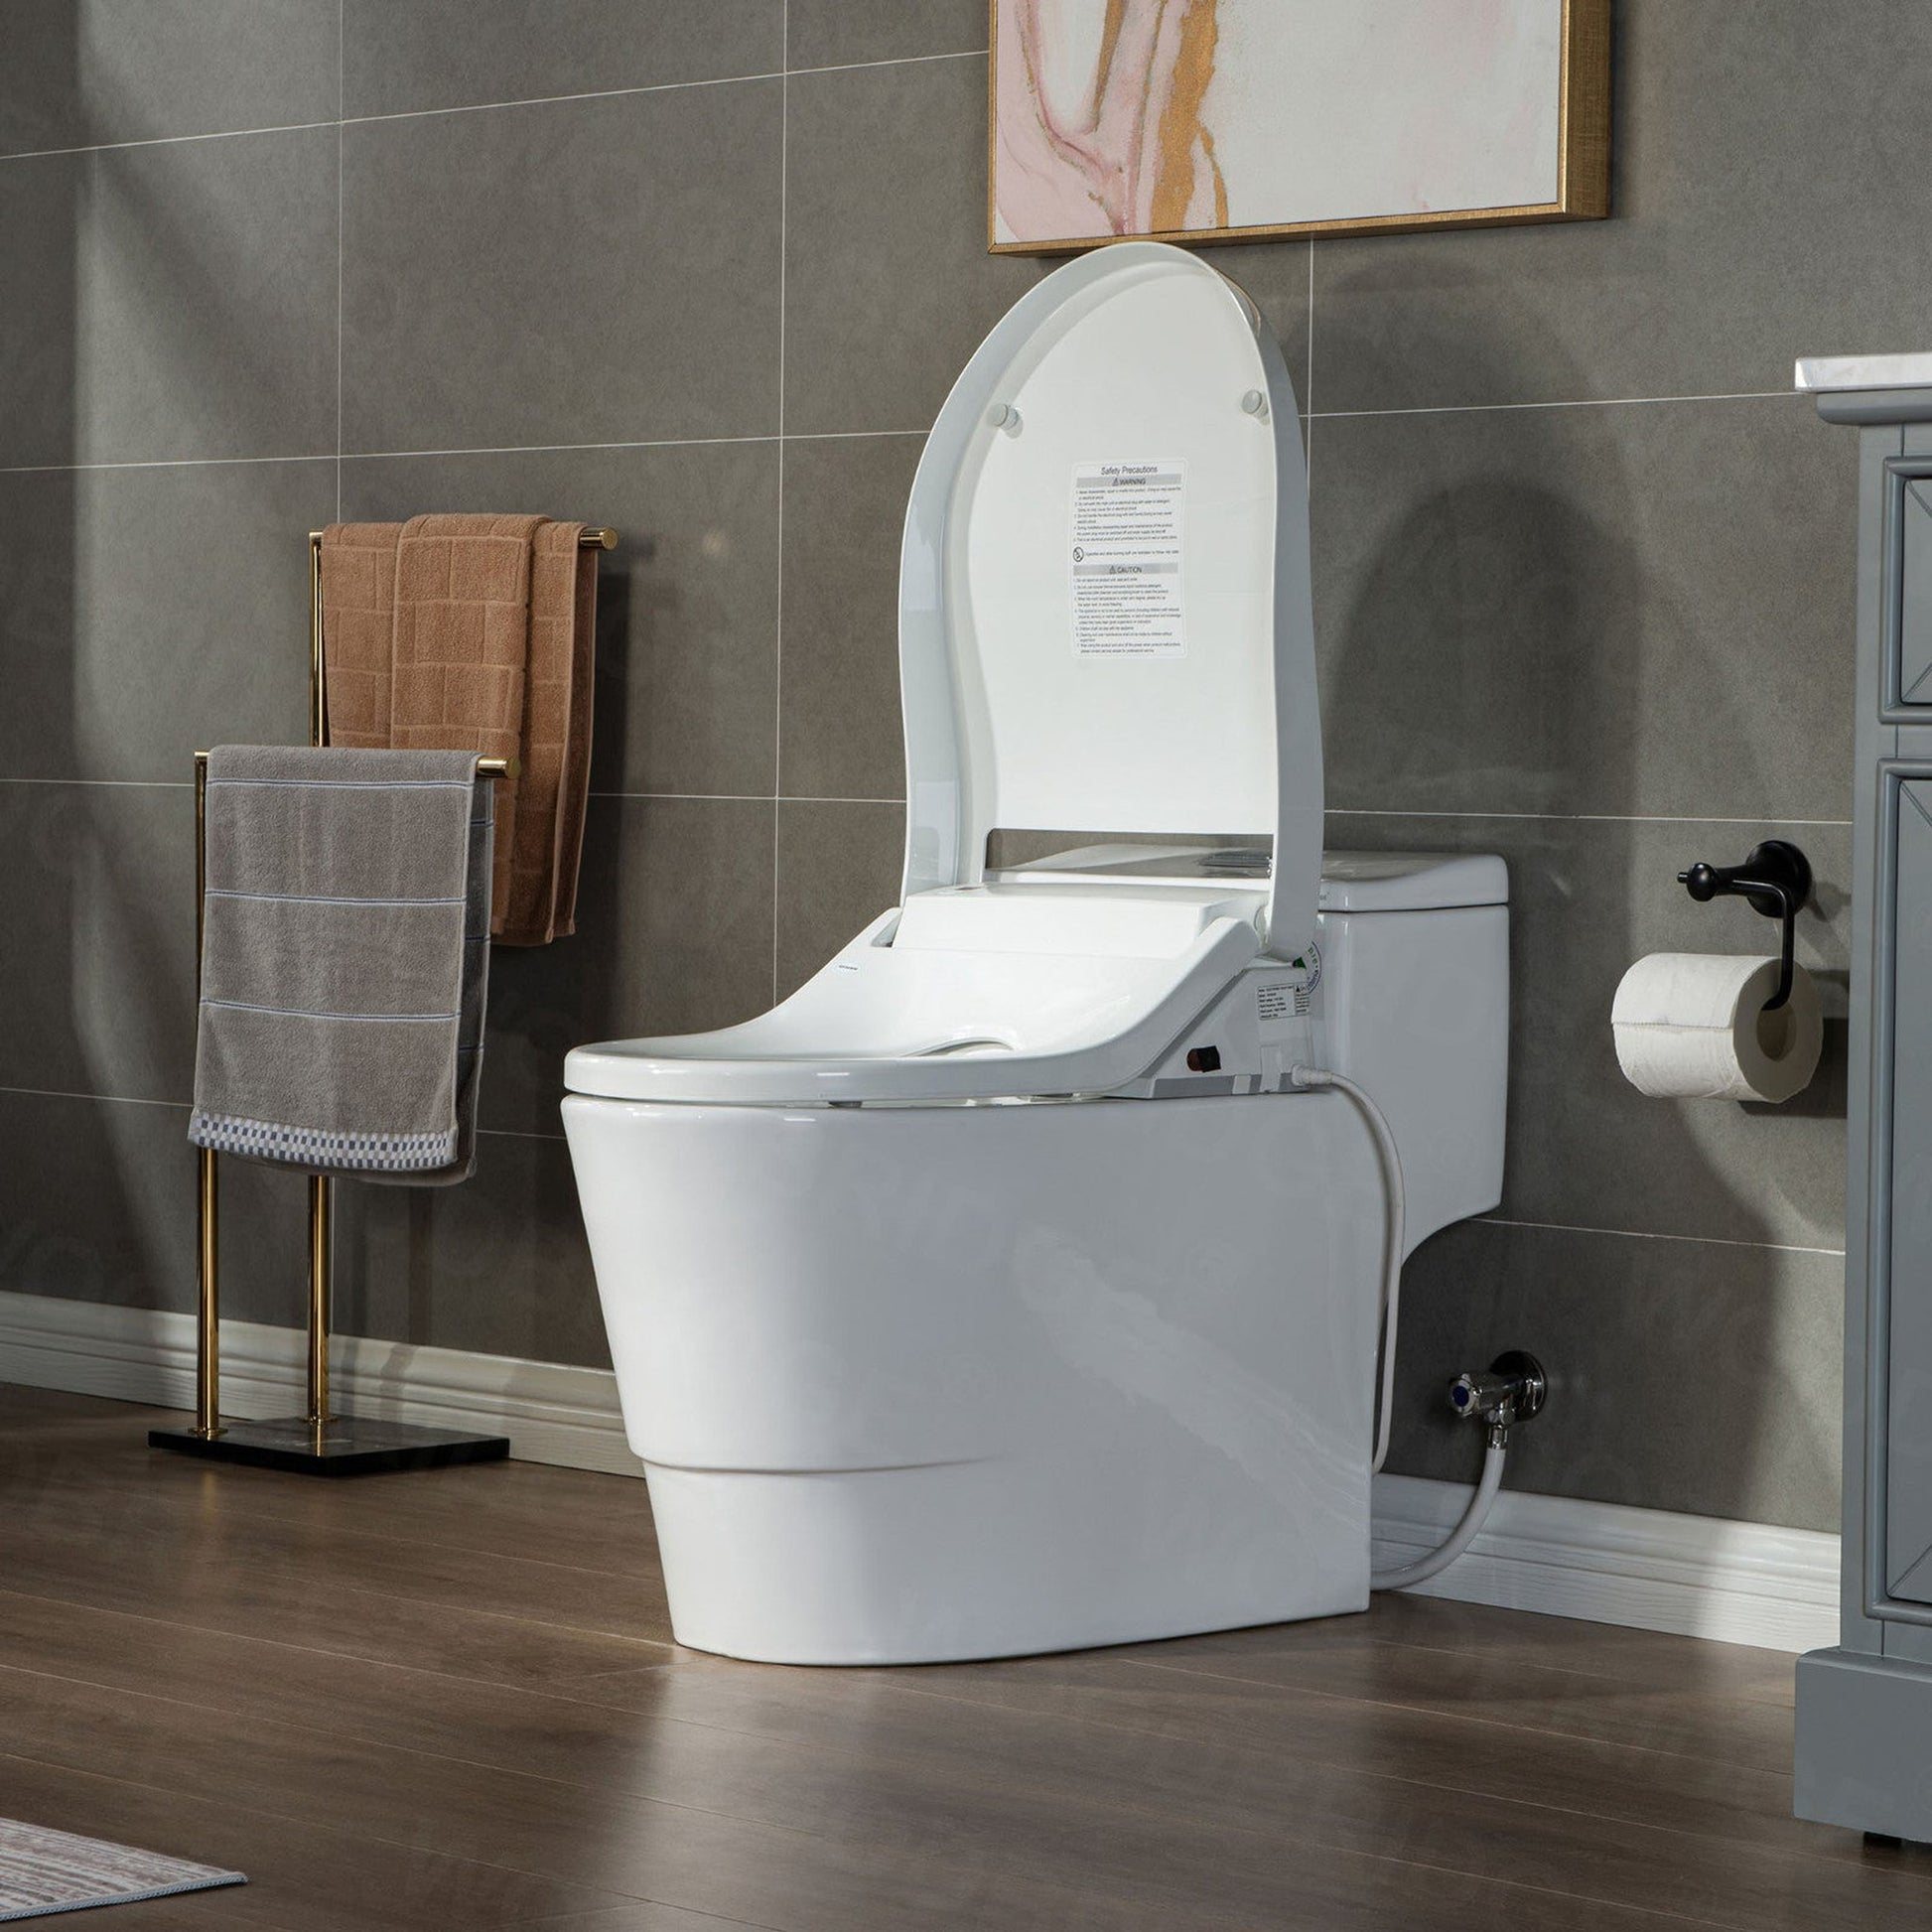 WoodBridge T-0737 White Toilet and Bidet Luxury Elongated One Piece Advanced Smart Seat With Temperature Controlled Wash Functions and Air Dryer